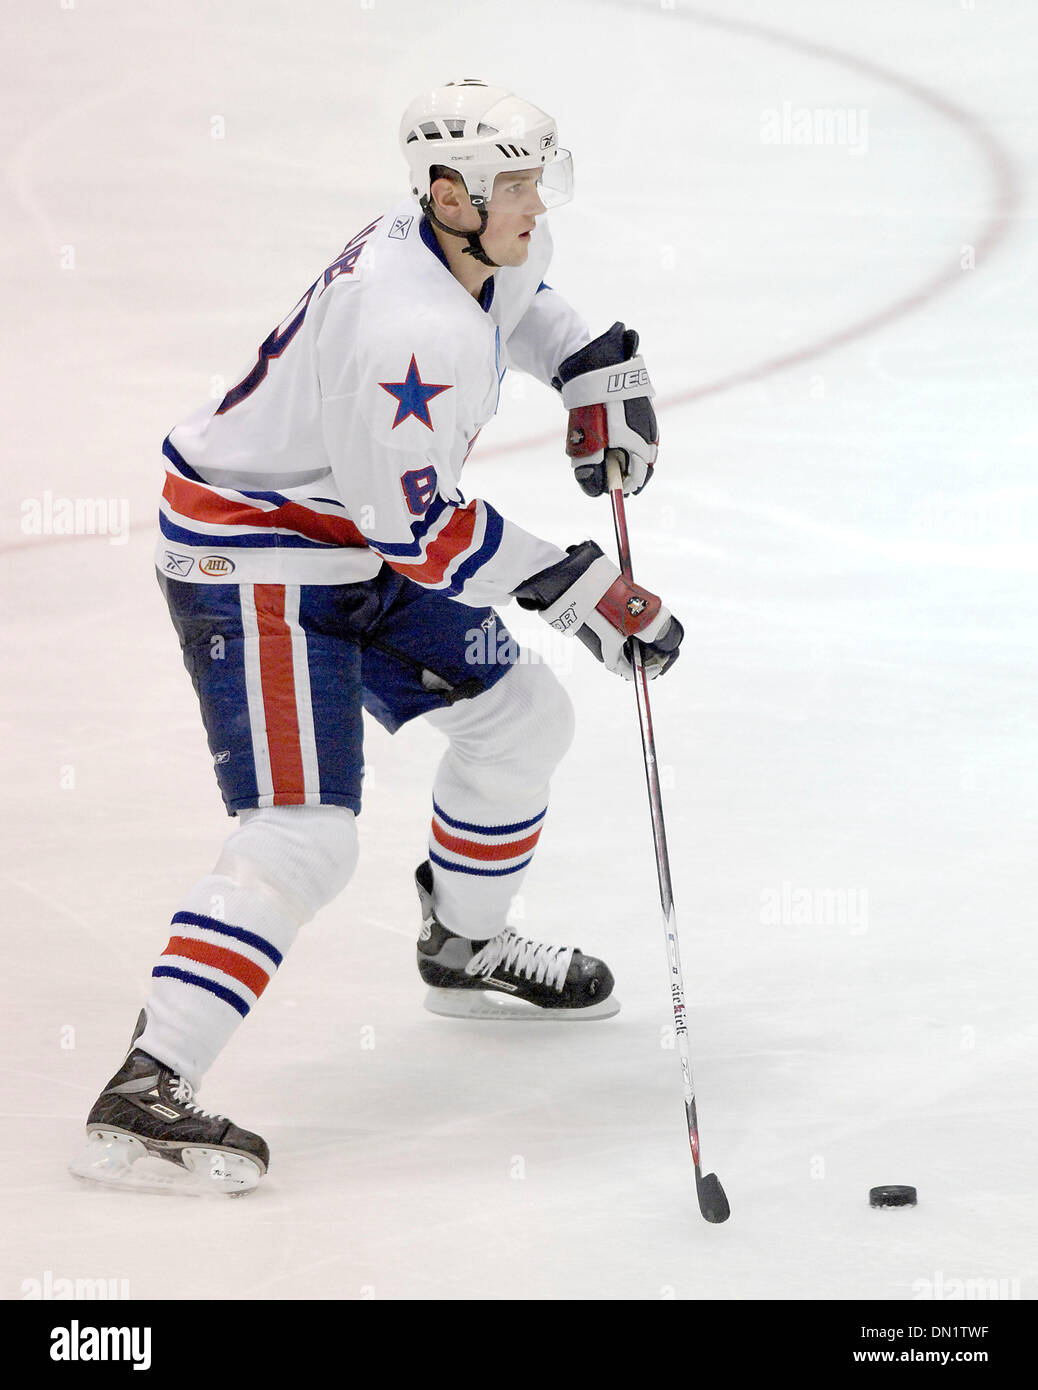 November 17, 2006: AHL - Rochester defenseman Margin Lojek #8 in action against Manitoba. The Manitoba Canucks at Rochester Americans at the Blue Cross Arena at the War Memorial Auditorium. Rochester defeated Manitoba 4 to 3 in OT.(Credit Image: © Alan Schwartz/Cal Sport Media) Stock Photo